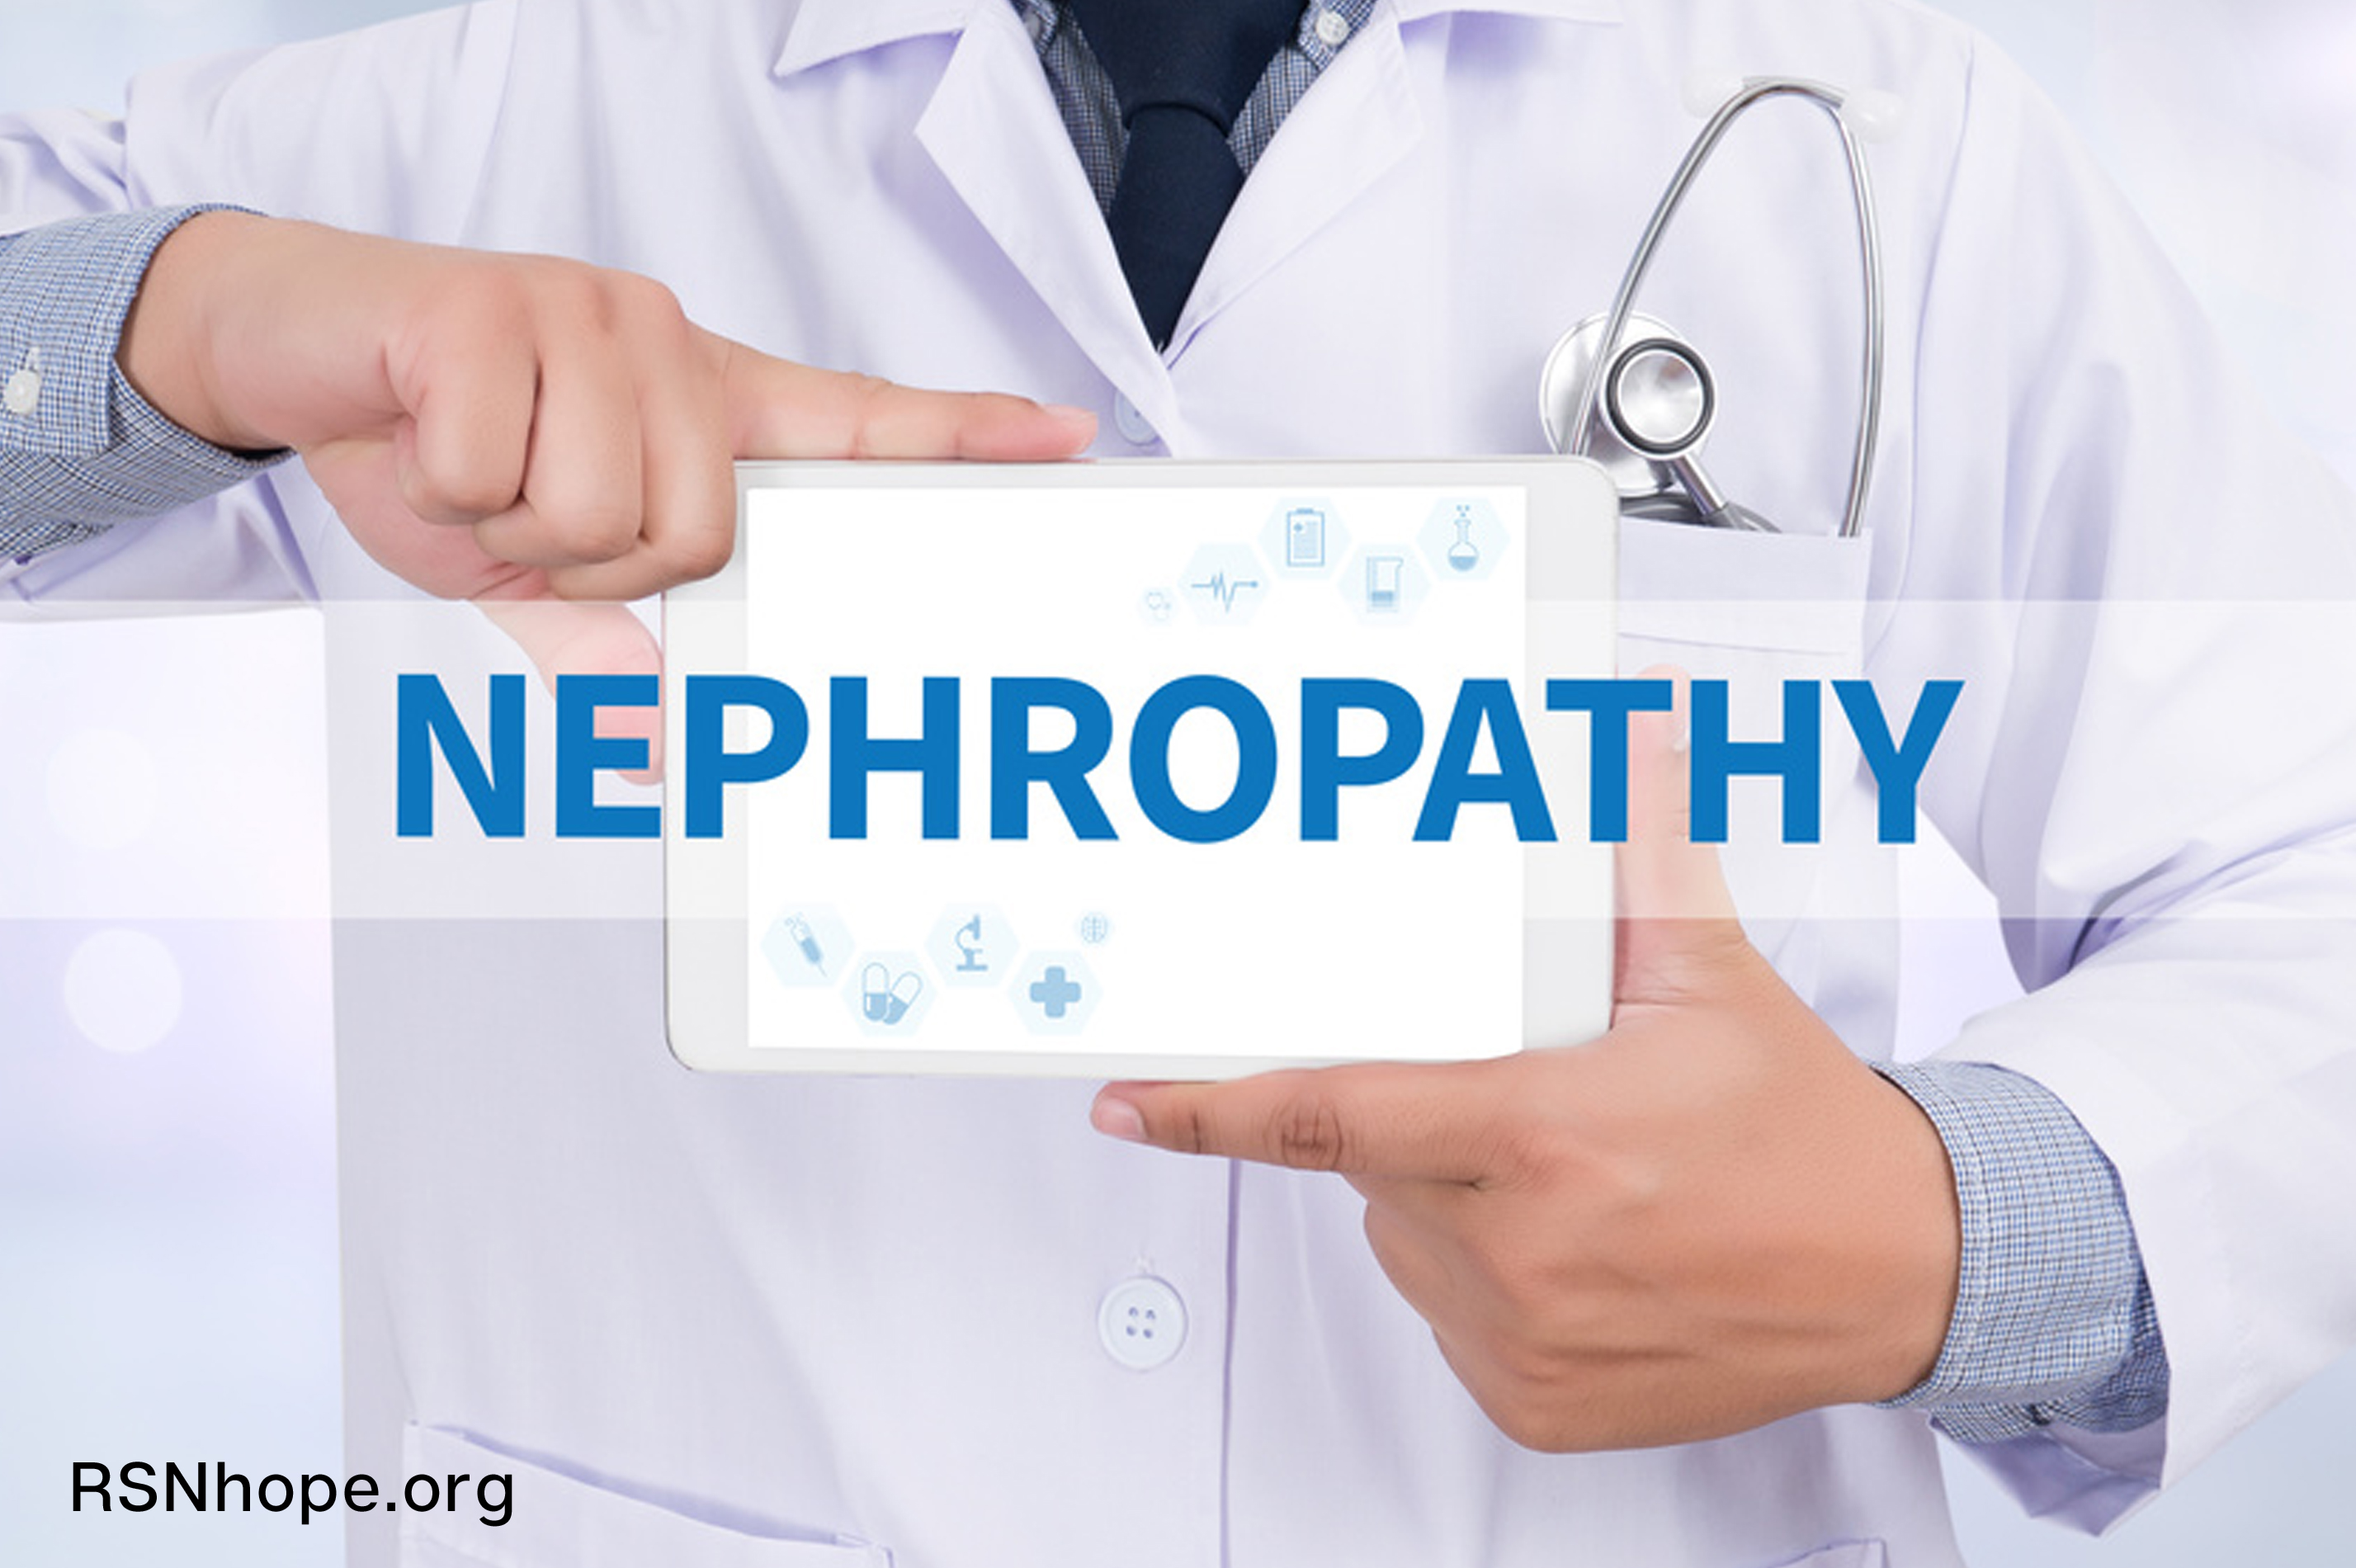 Nephropathy: A Complication of Diabetes that Damages the Kidneys